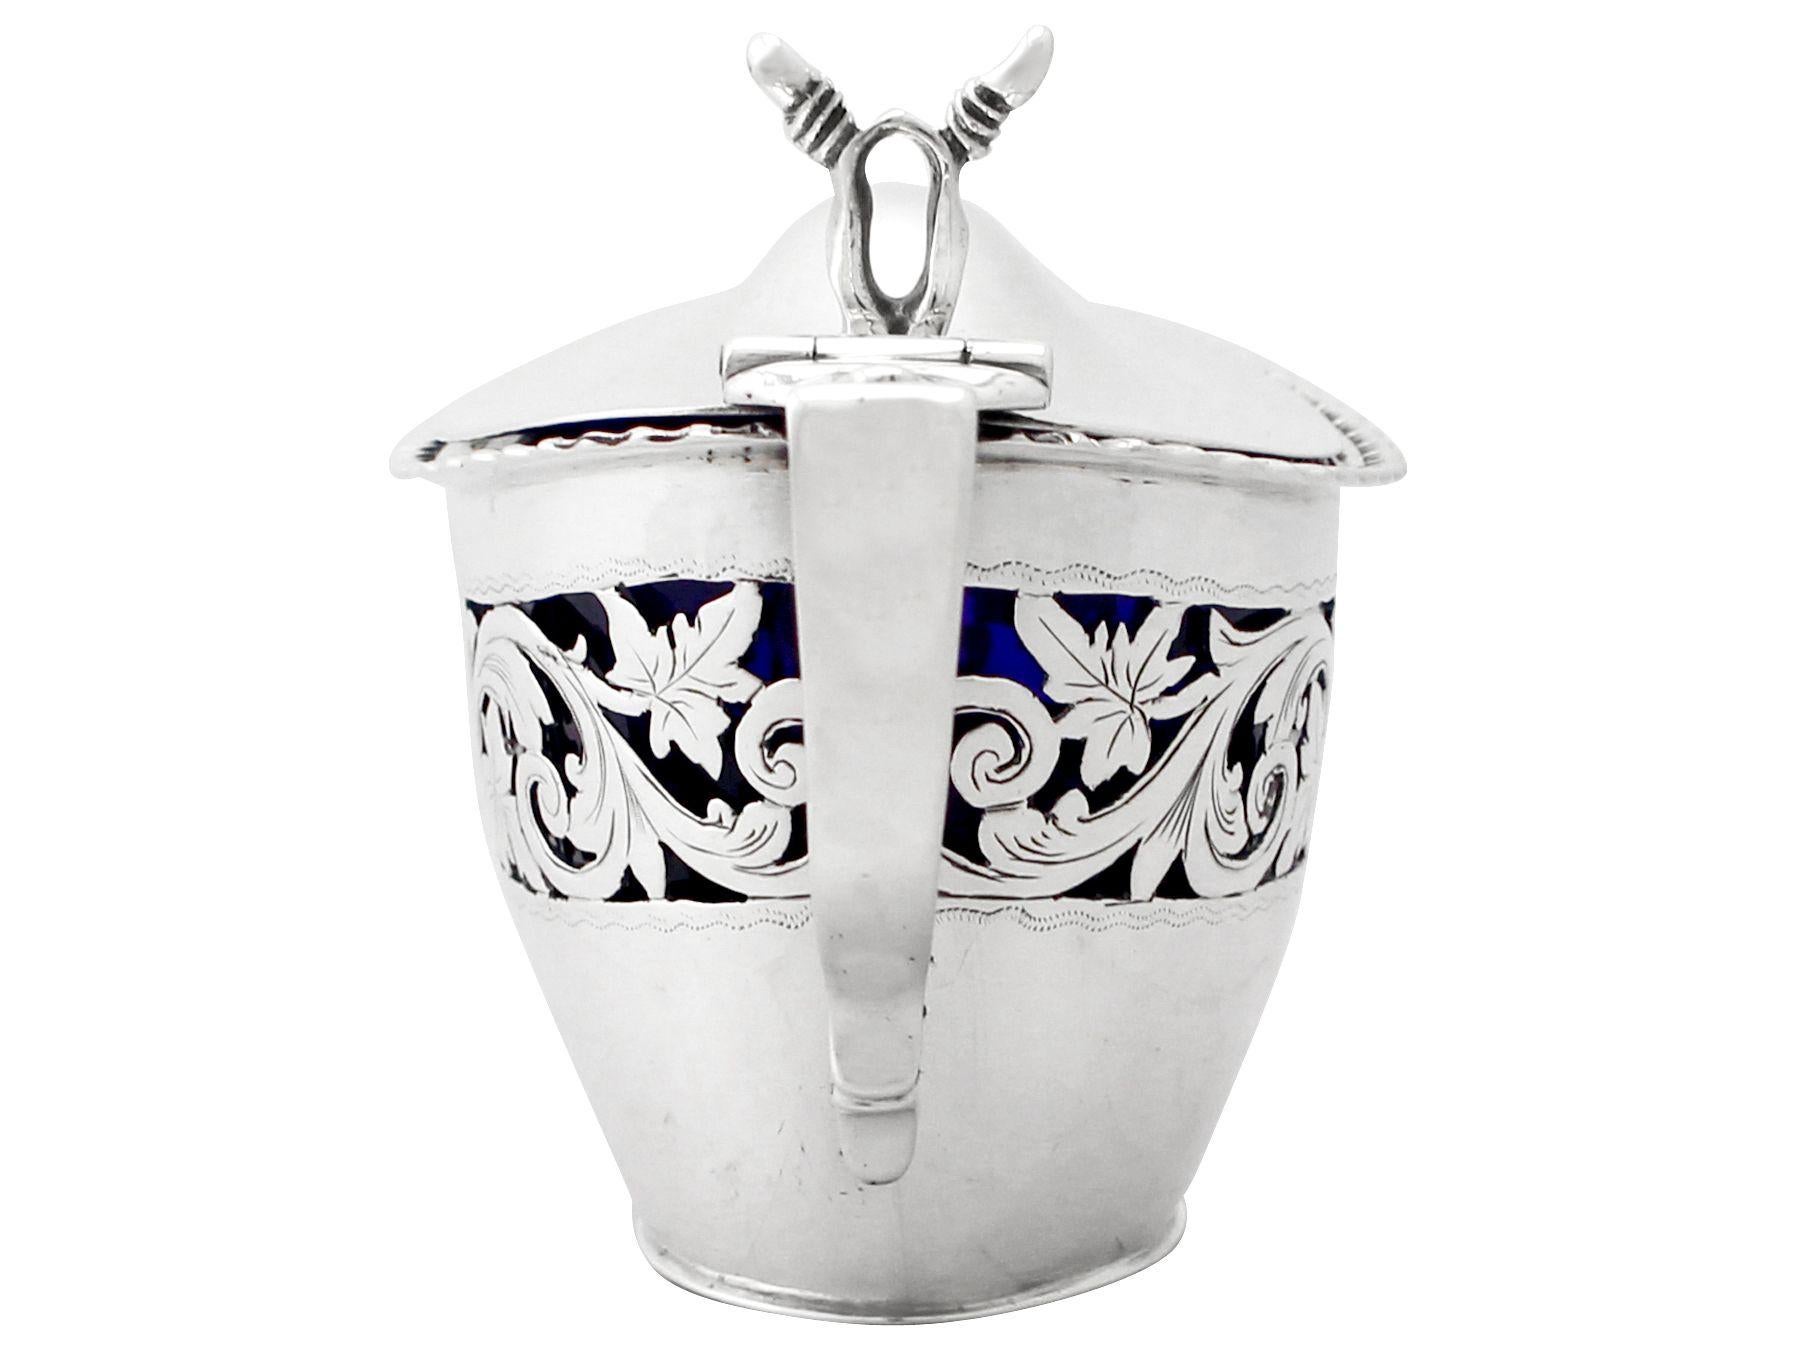 Late 19th Century 19th Century Victorian English Sterling Silver Mustard Pot, 1896 For Sale